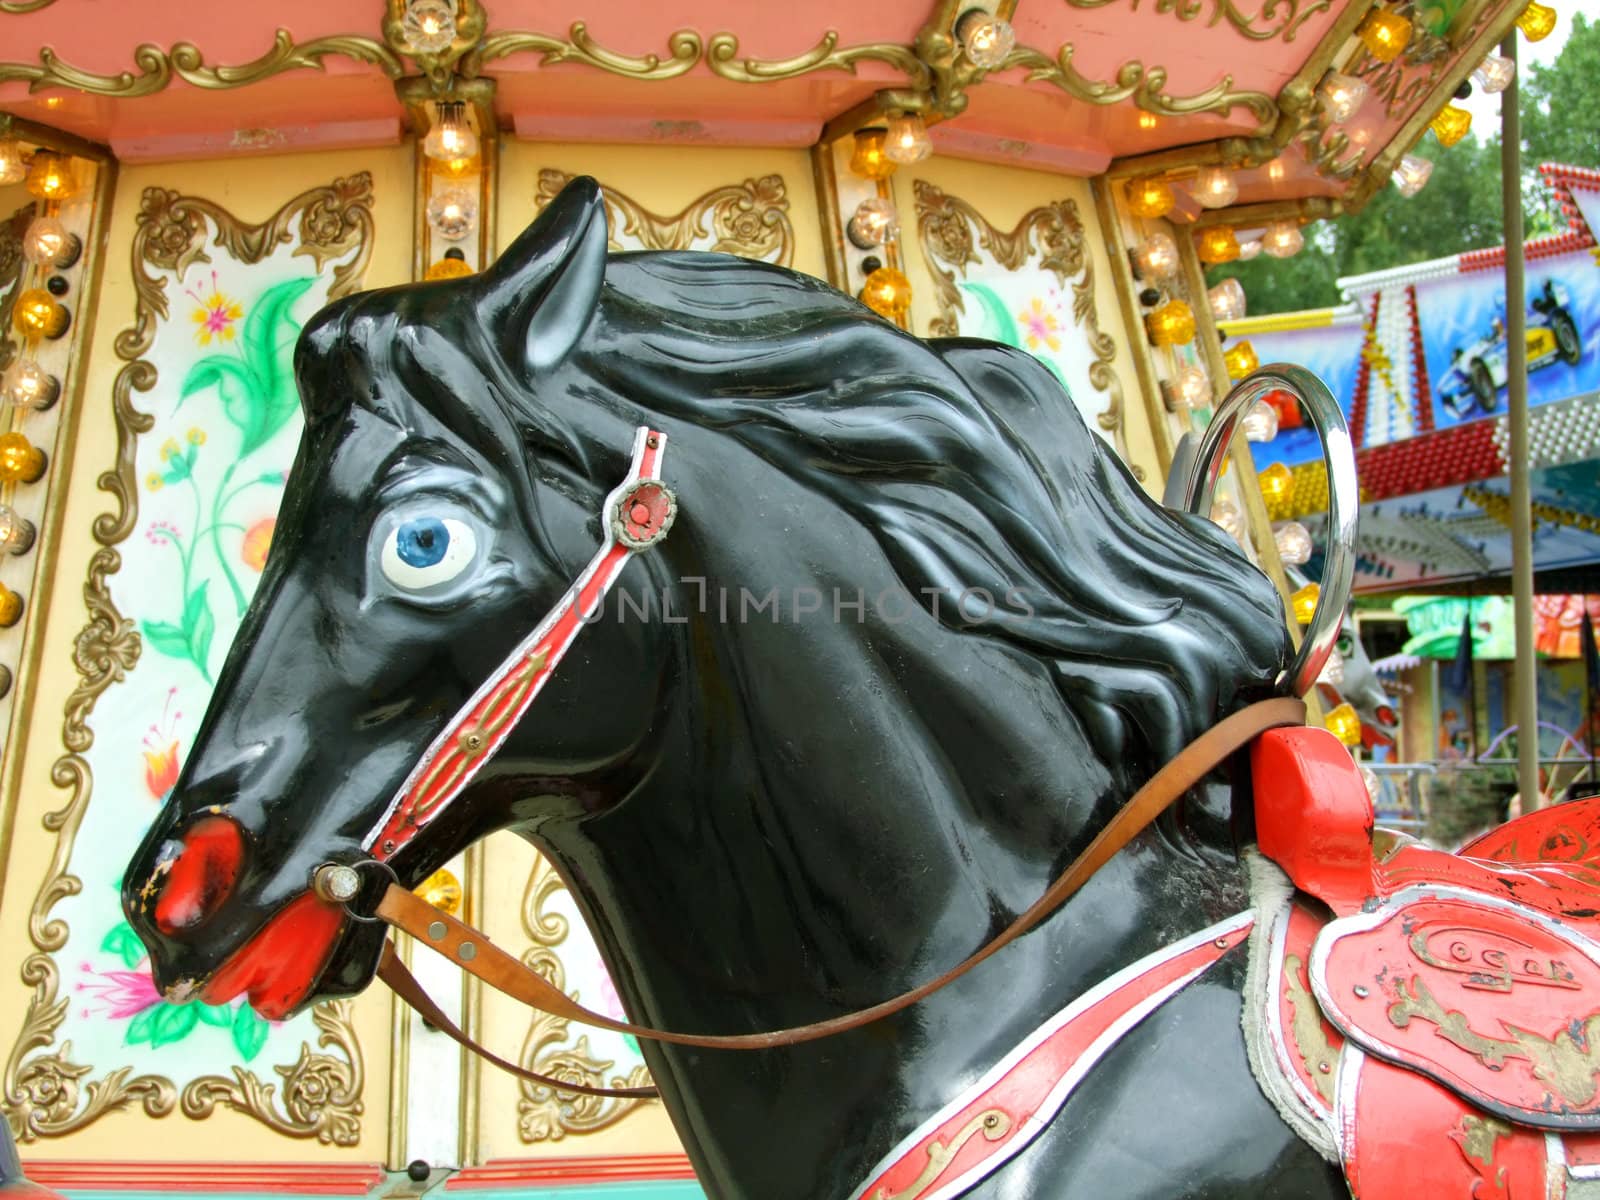 Carousel by Colour